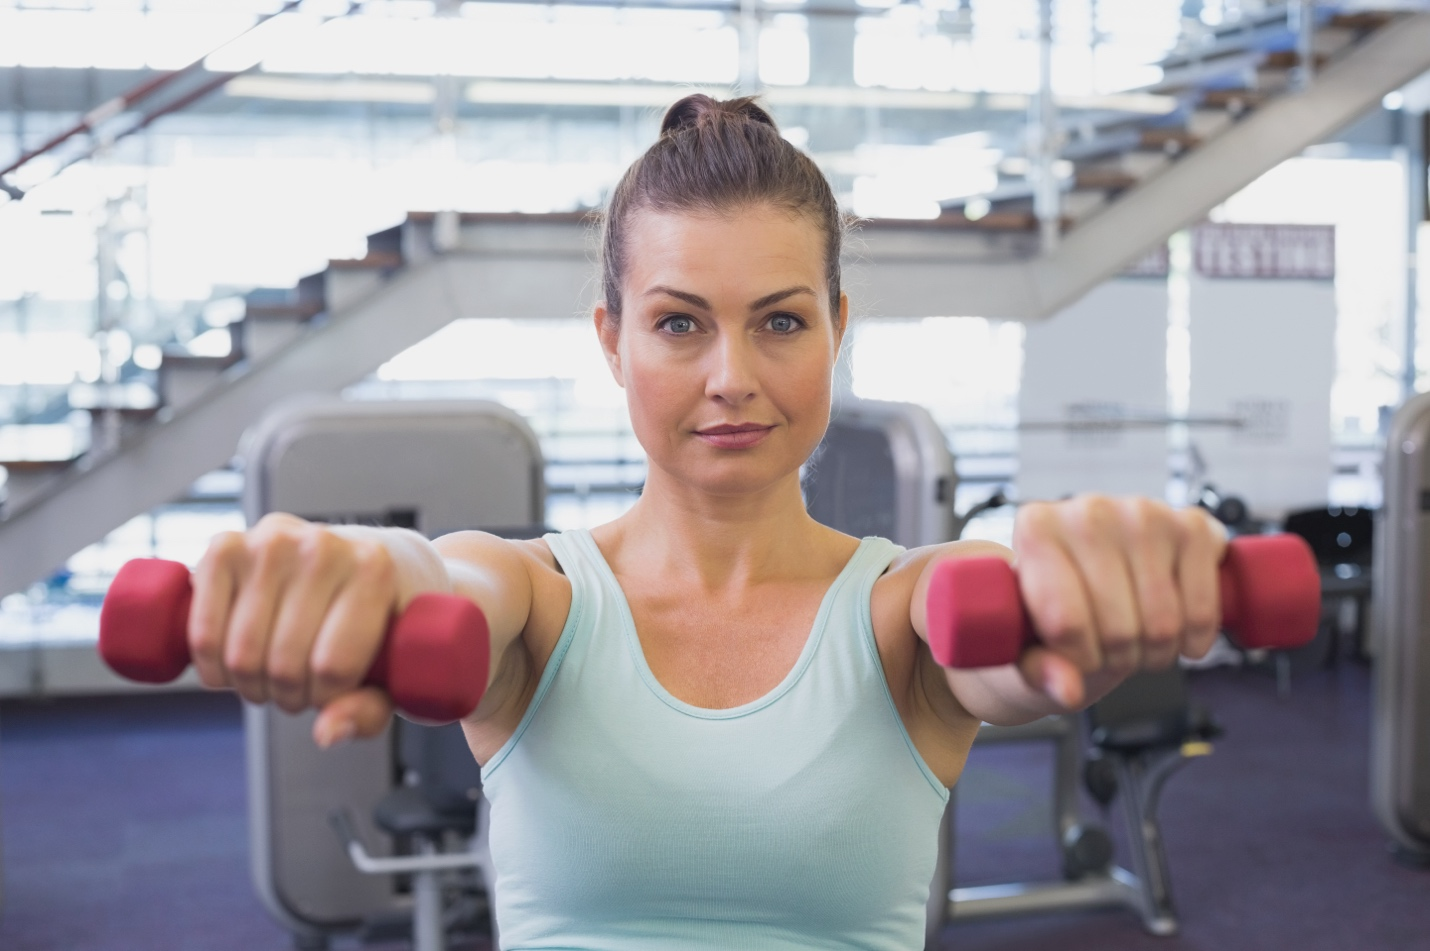  A woman holds two red dumbbells in front of her.